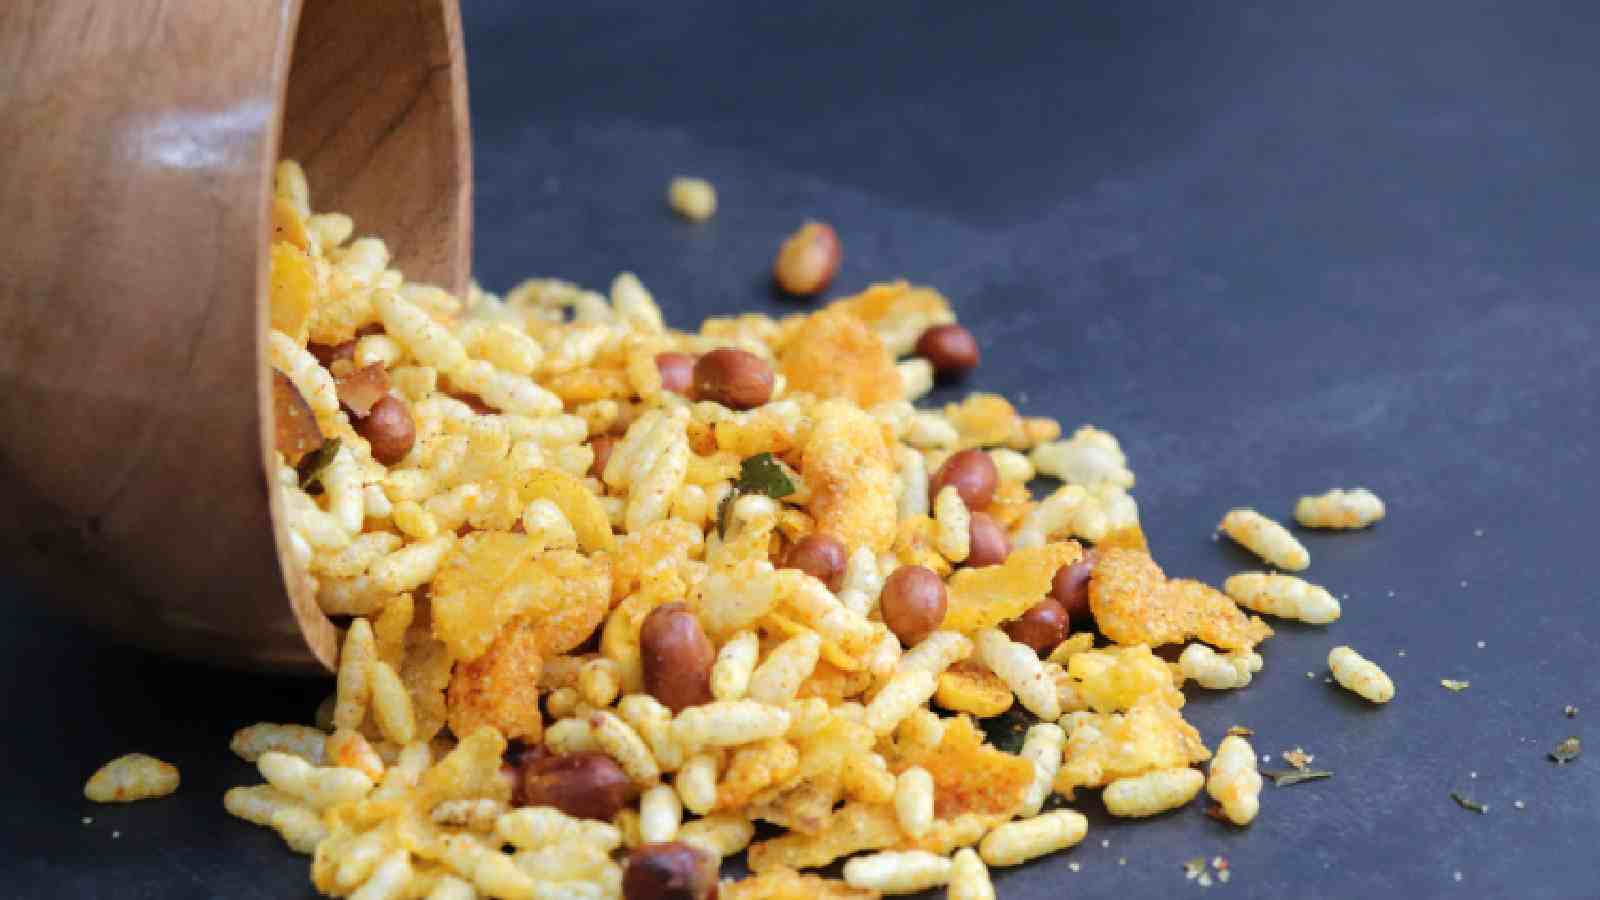 Munching on Magic: 7 Awesome Benefits of Murmura (Puffed Rice) for Weight Loss Snacks